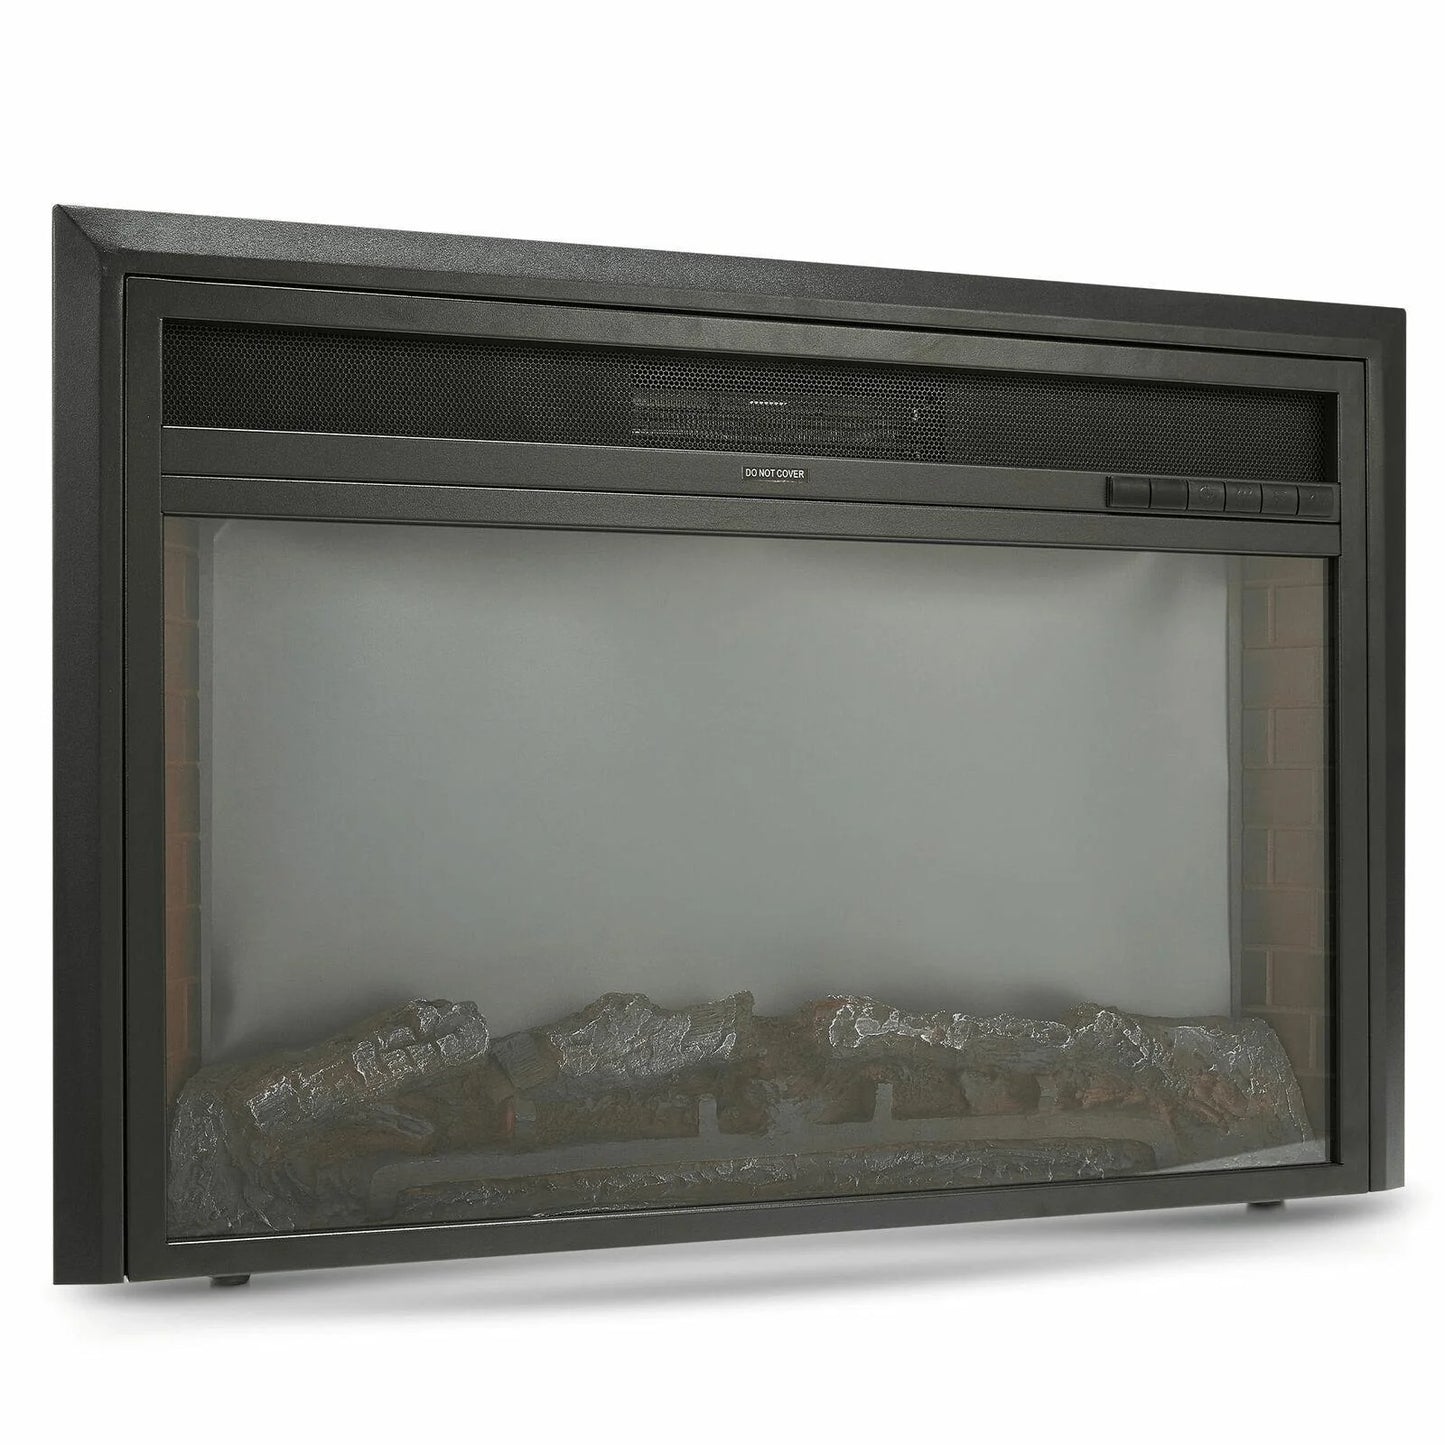 Electric Fireplace Insert - 32" In Wall Fireplace Heater - 1500W Built In Electric Fireplace with Remote Control